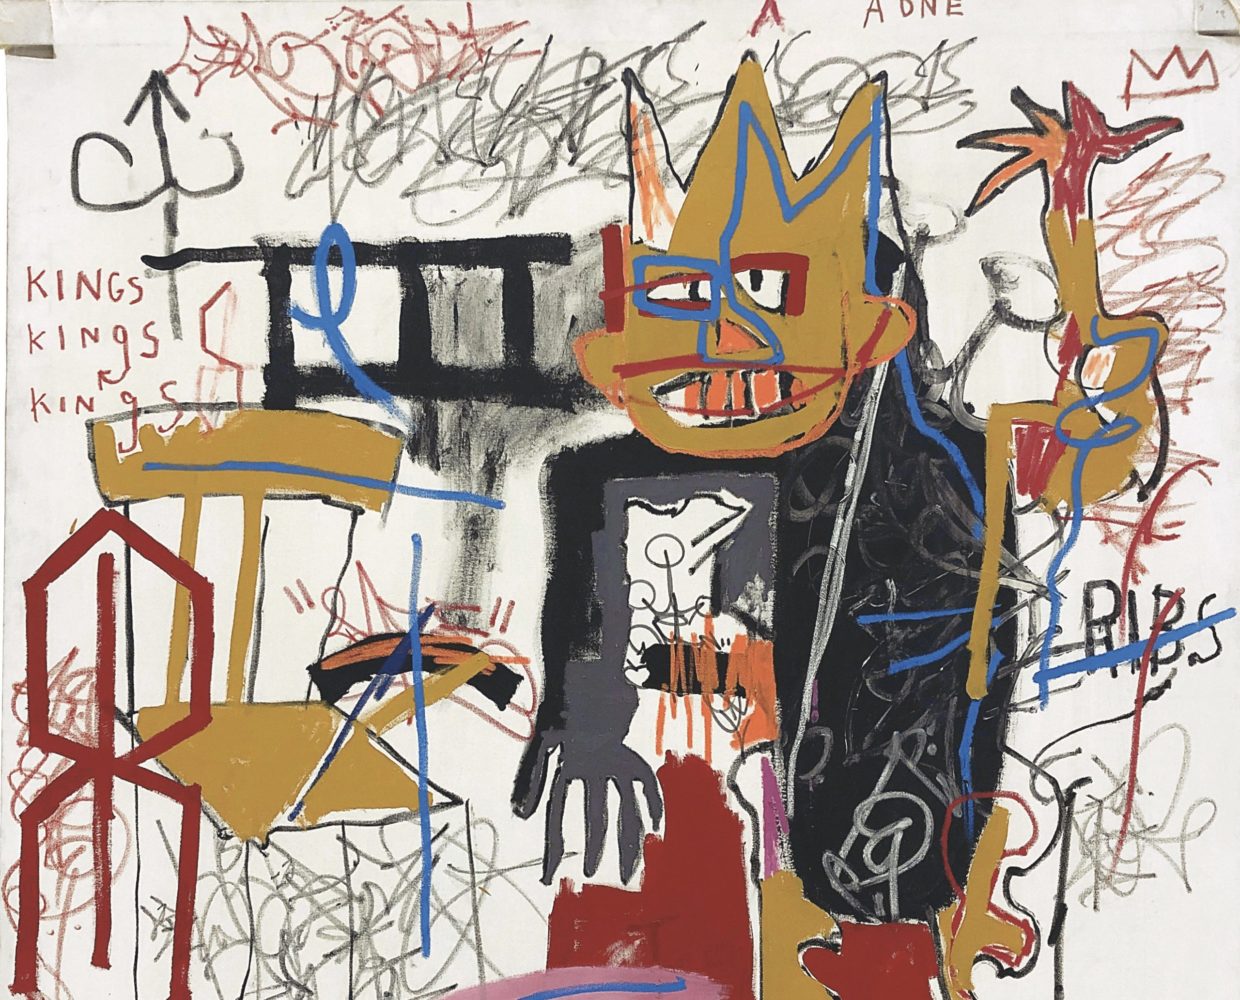 Phillips Southampton Opens with Special Exhibition Featuring Basquiat Work